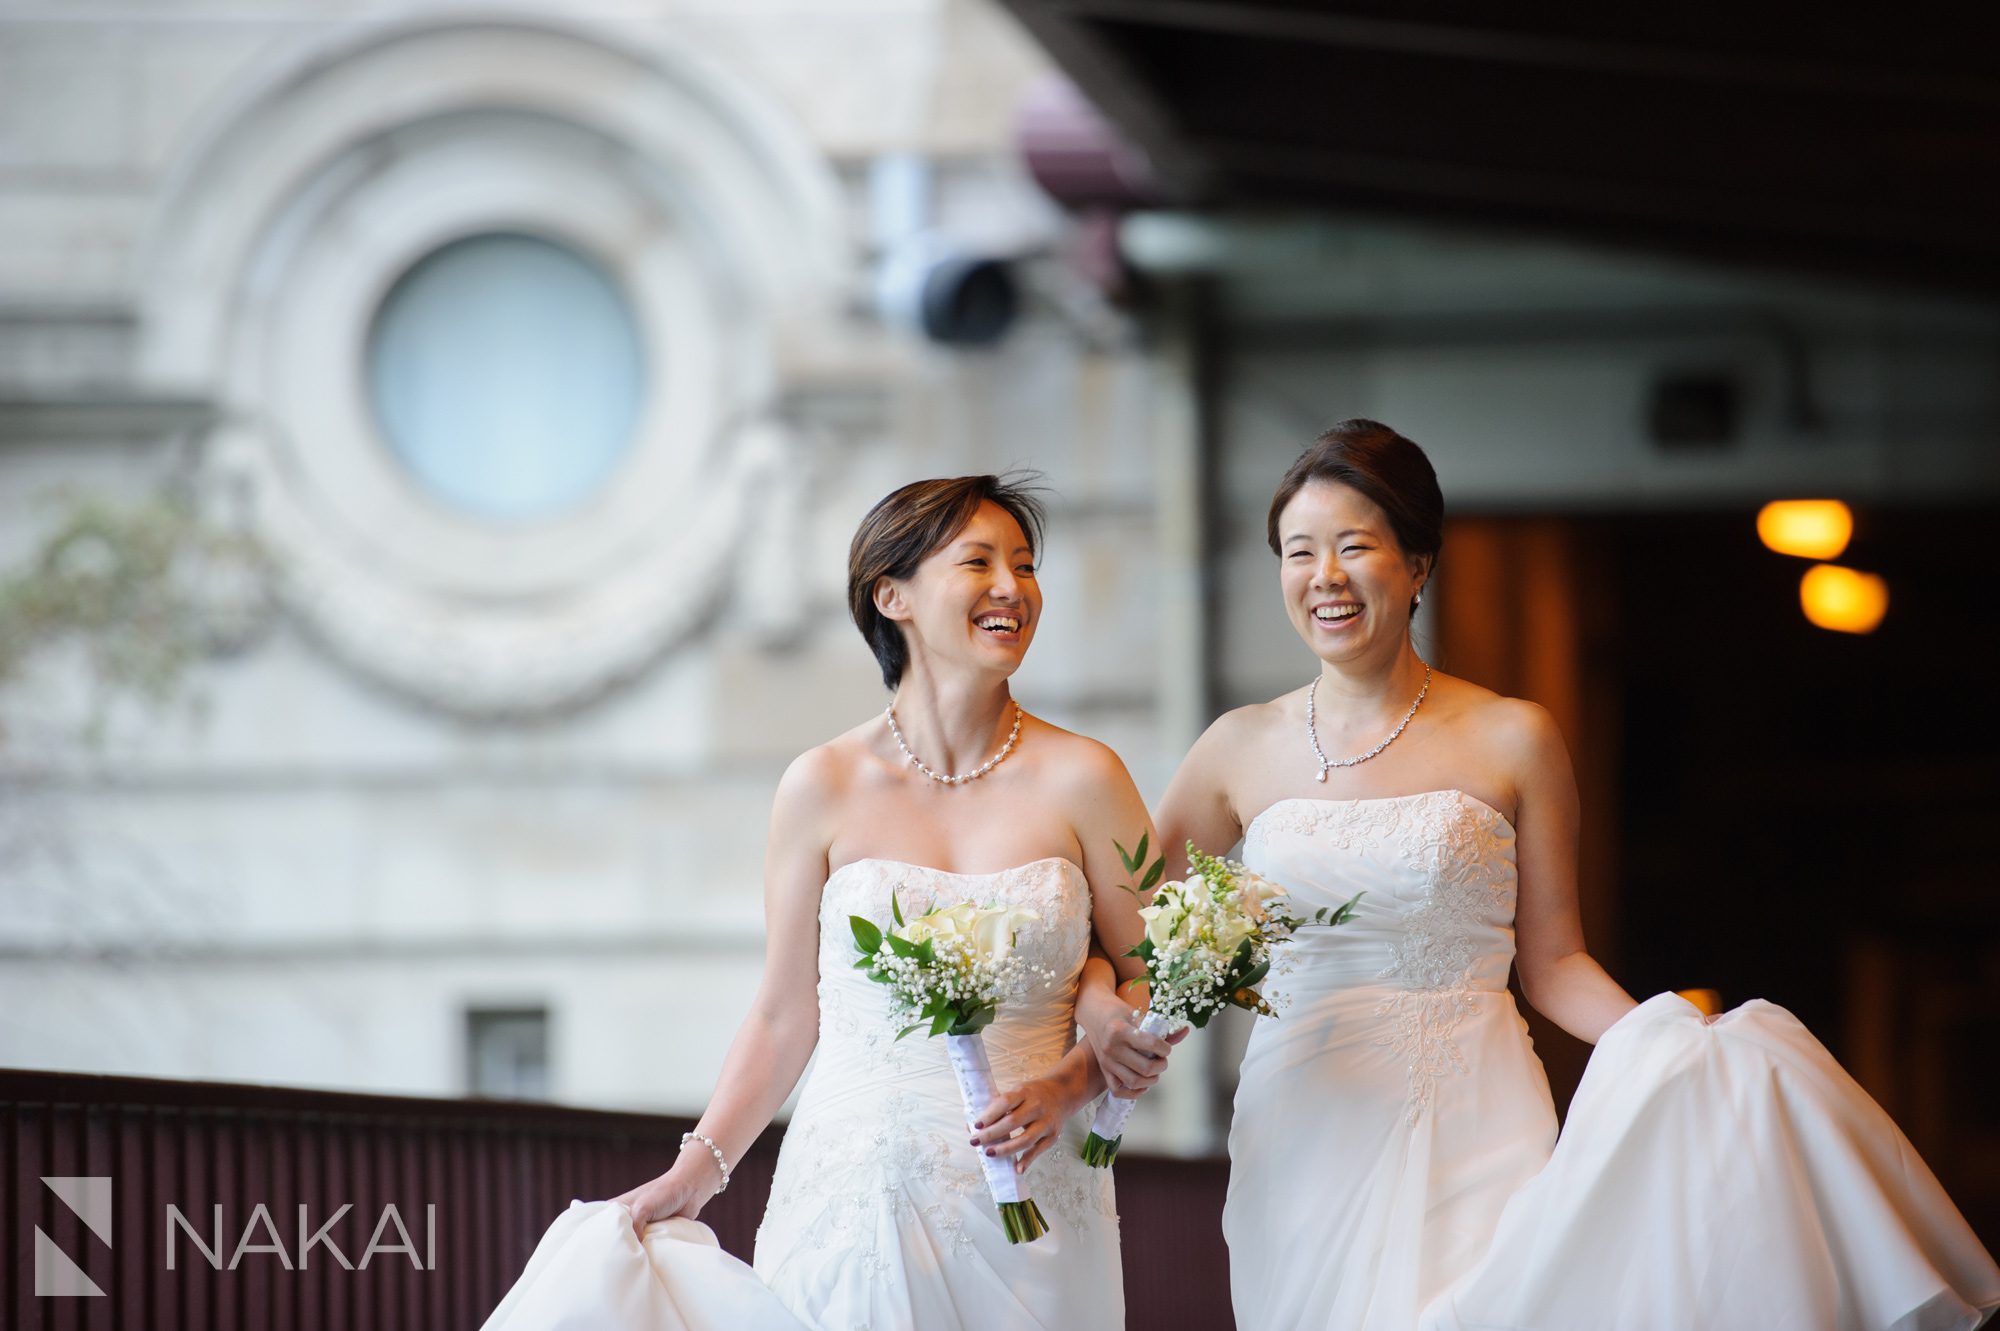 chicago-lesbian-wedding-pictures-nakai-photography-018